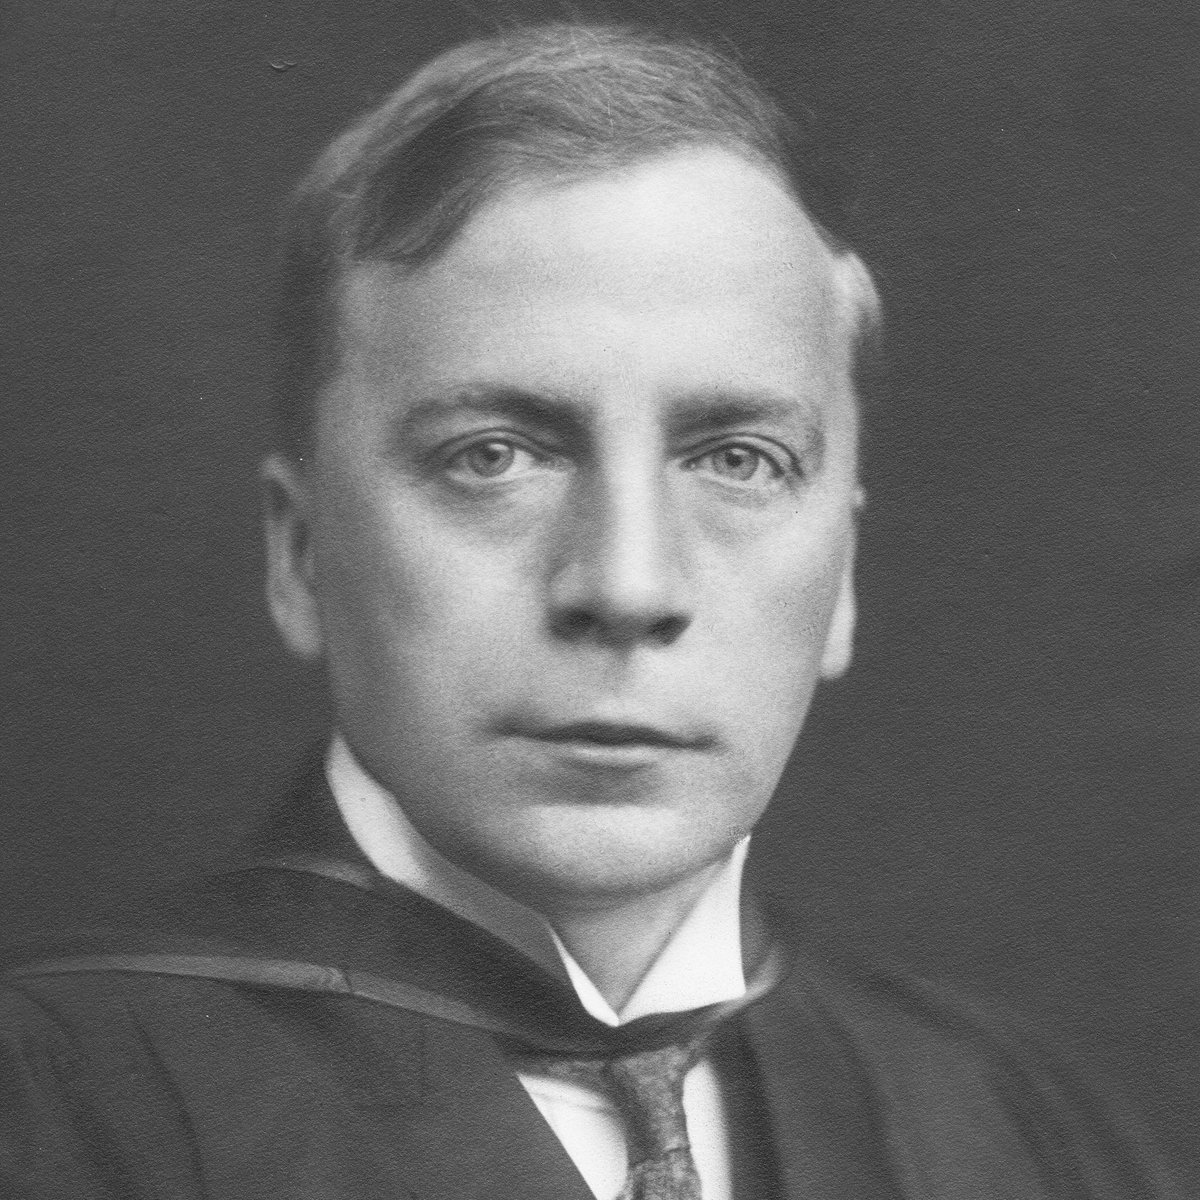 29-year-old William Hewins became LSE’s first Director in 1895 and remained in post until becoming Secretary to Joseph Chamberlain’s Tariff Commission in 1903. Born #OnThisDay in 1865, he played an enormous part in setting up LSE. Read his story 📖👉 ow.ly/bJrF50RAjgK